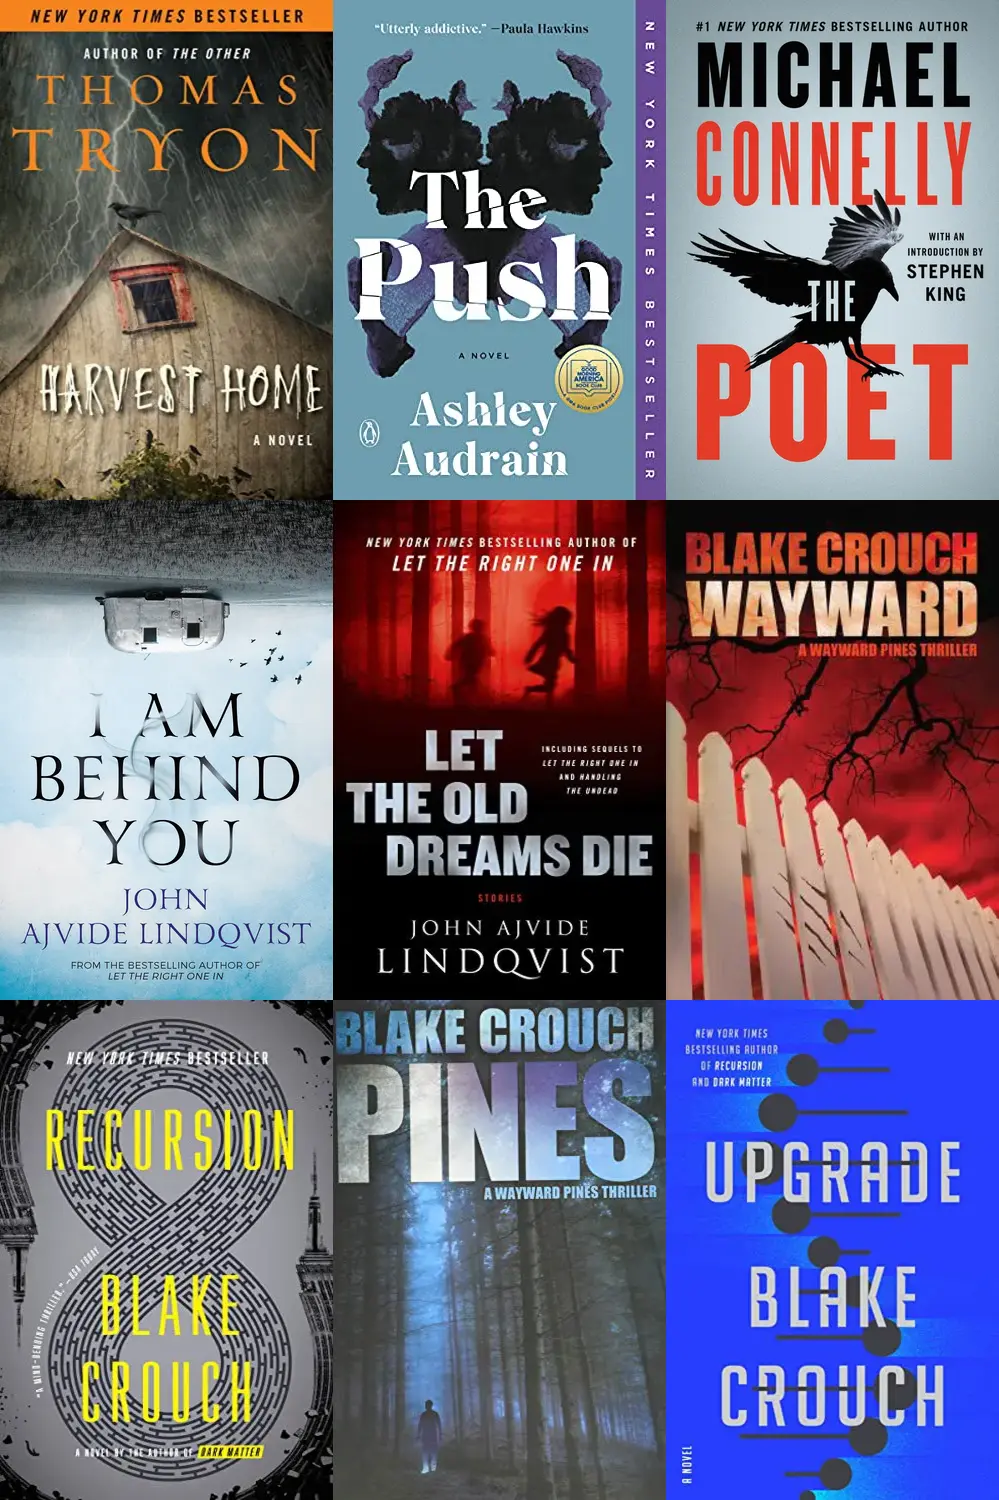 If I liked The Last Town (Wayward Pines) by Blake Crouch, what